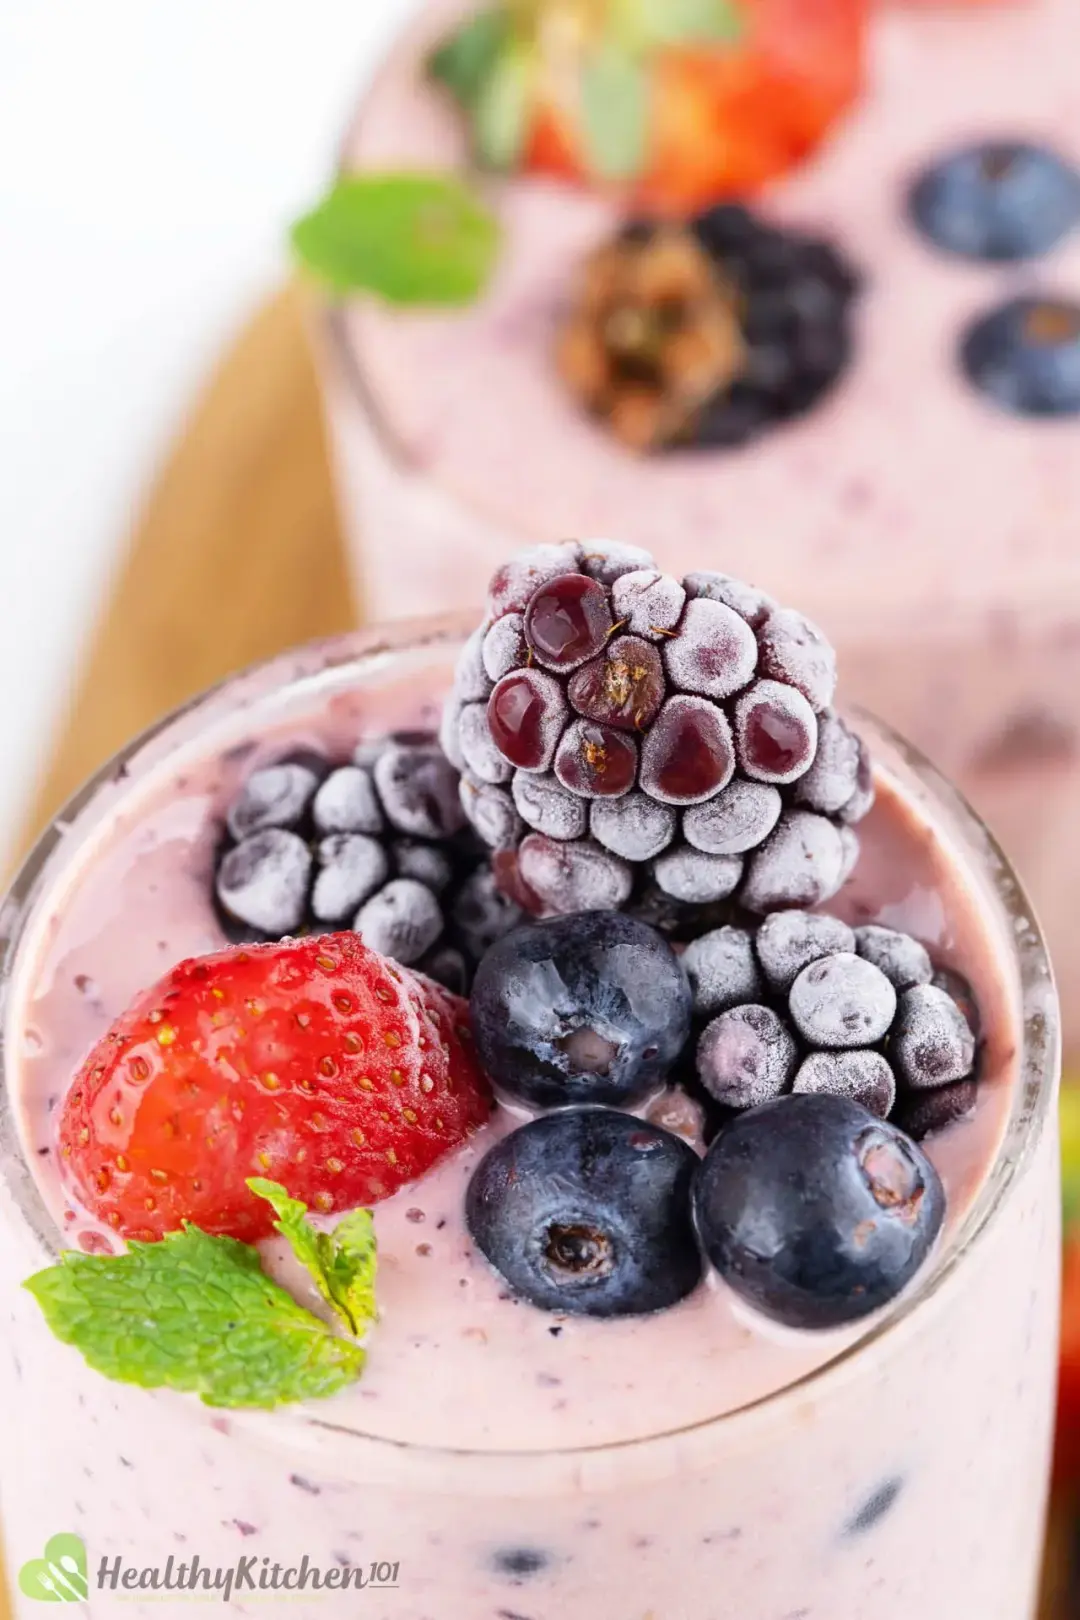 A close-up shot of two smoothie glasses, both filled with berries on top